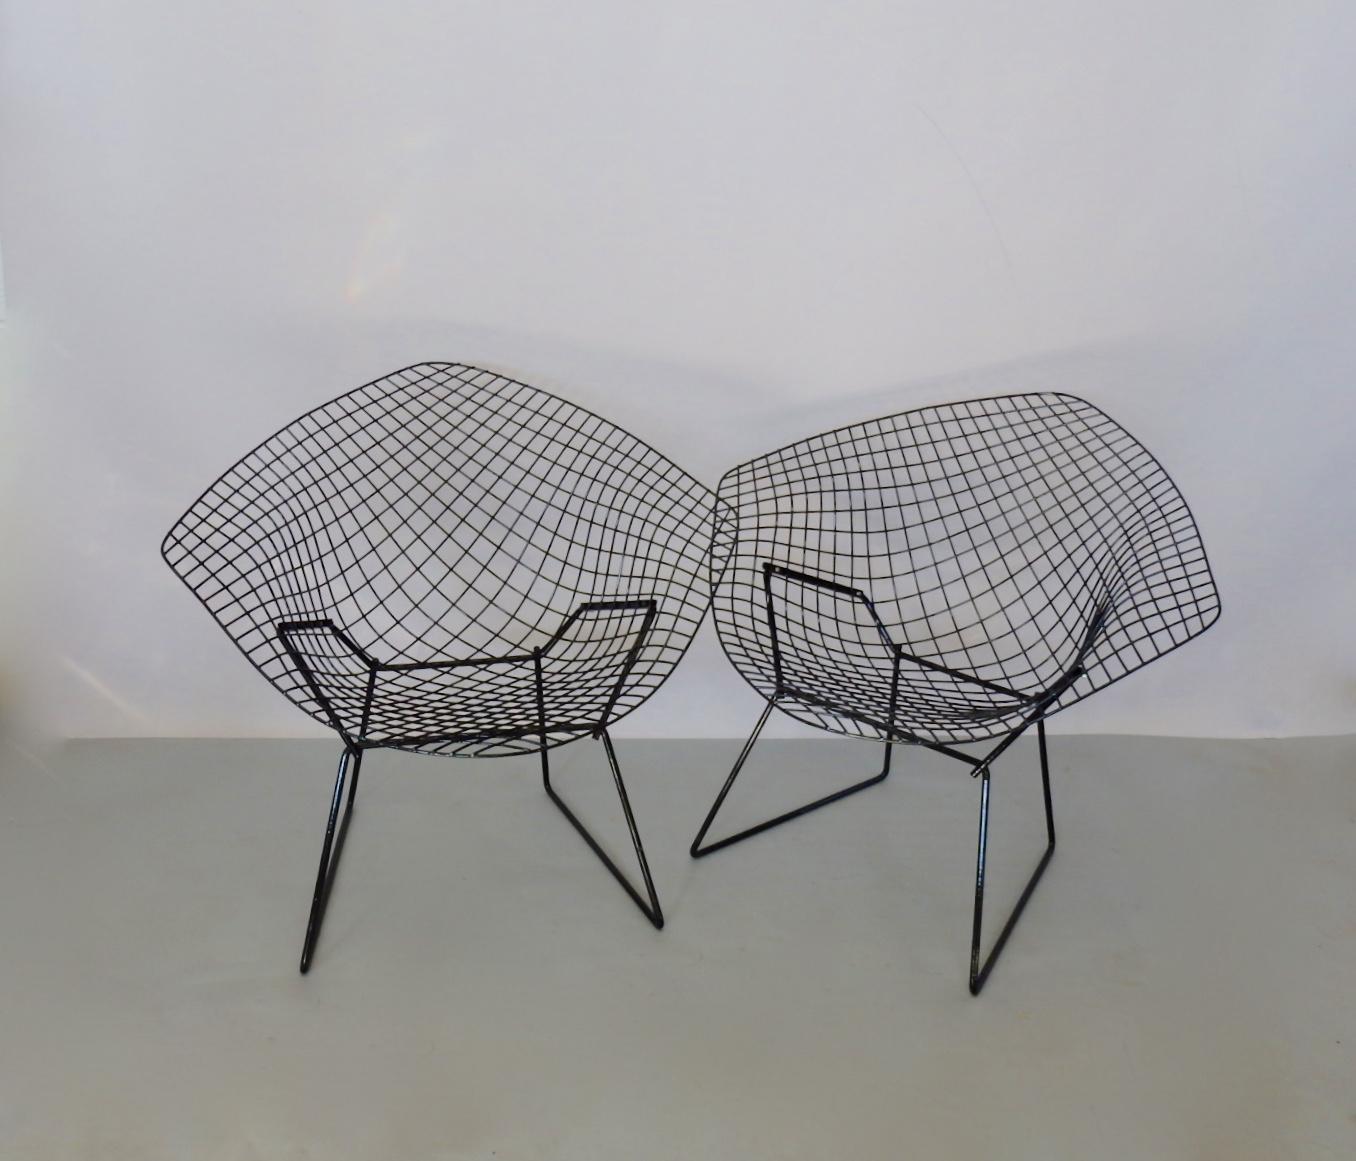 Recently powder coated in gloss black . Pair of Harry Bertoia for Knoll welded steel wire diamond chairs. Ship dis assembled MAY be cheaper . Inquire before purchase .